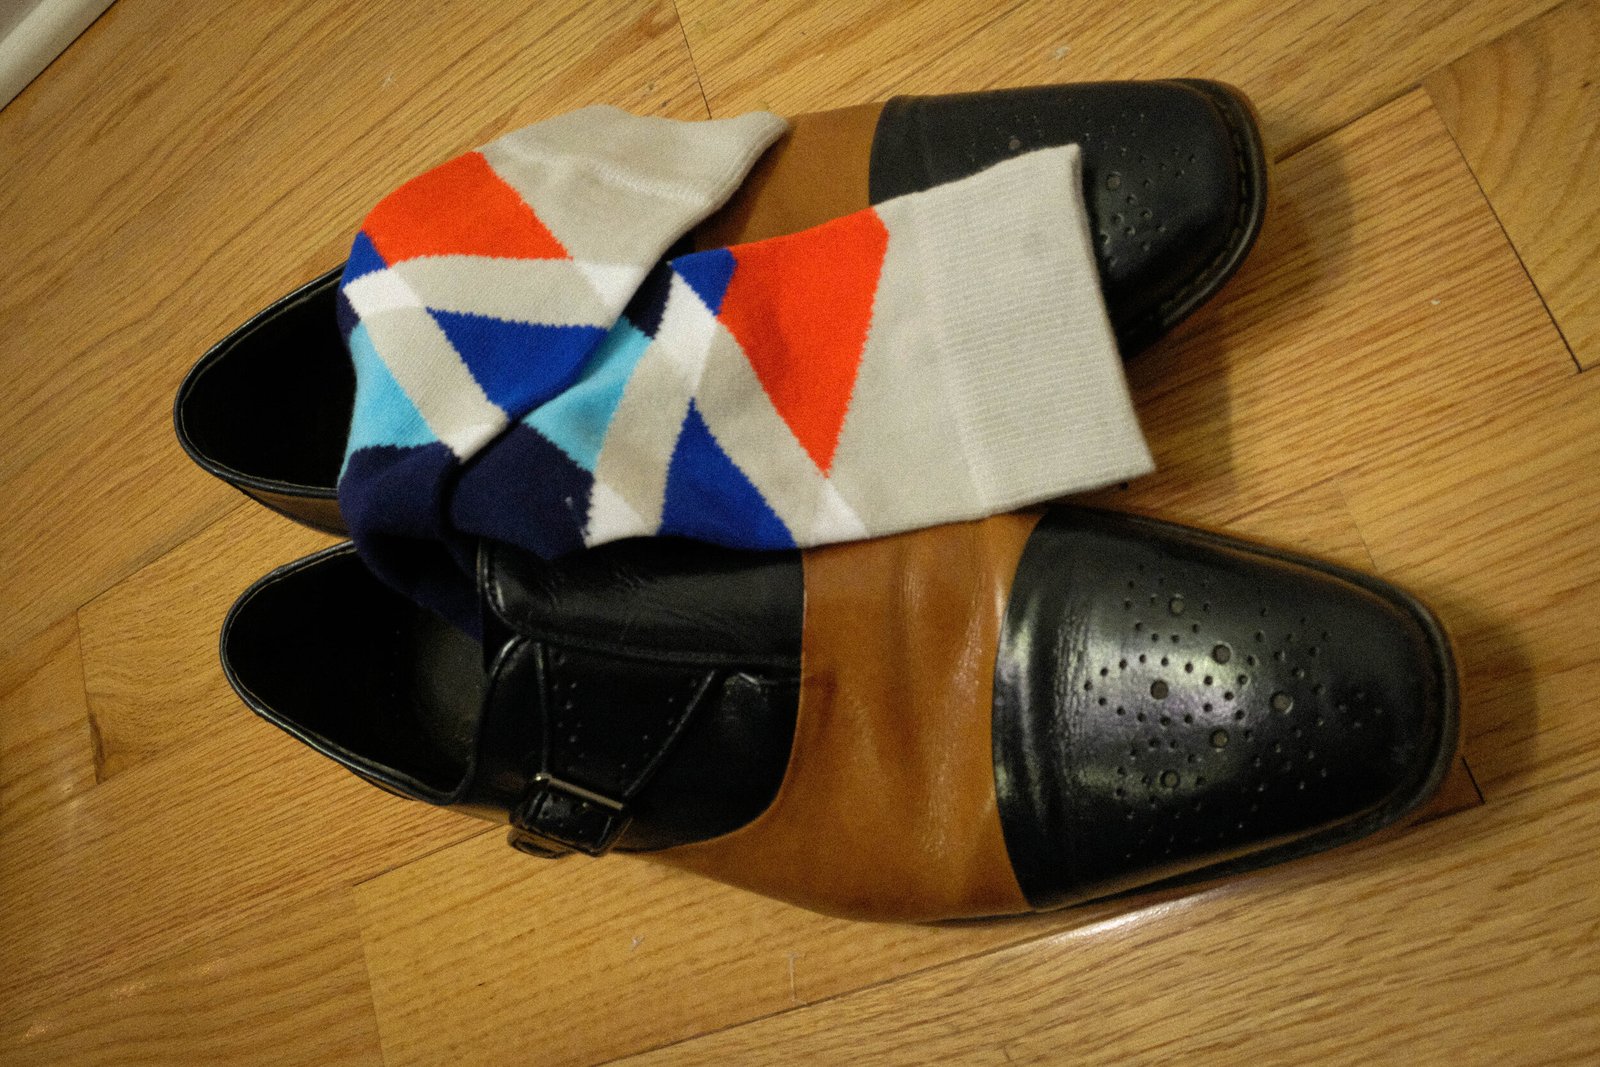 a pair of dress shoes and colorful socks